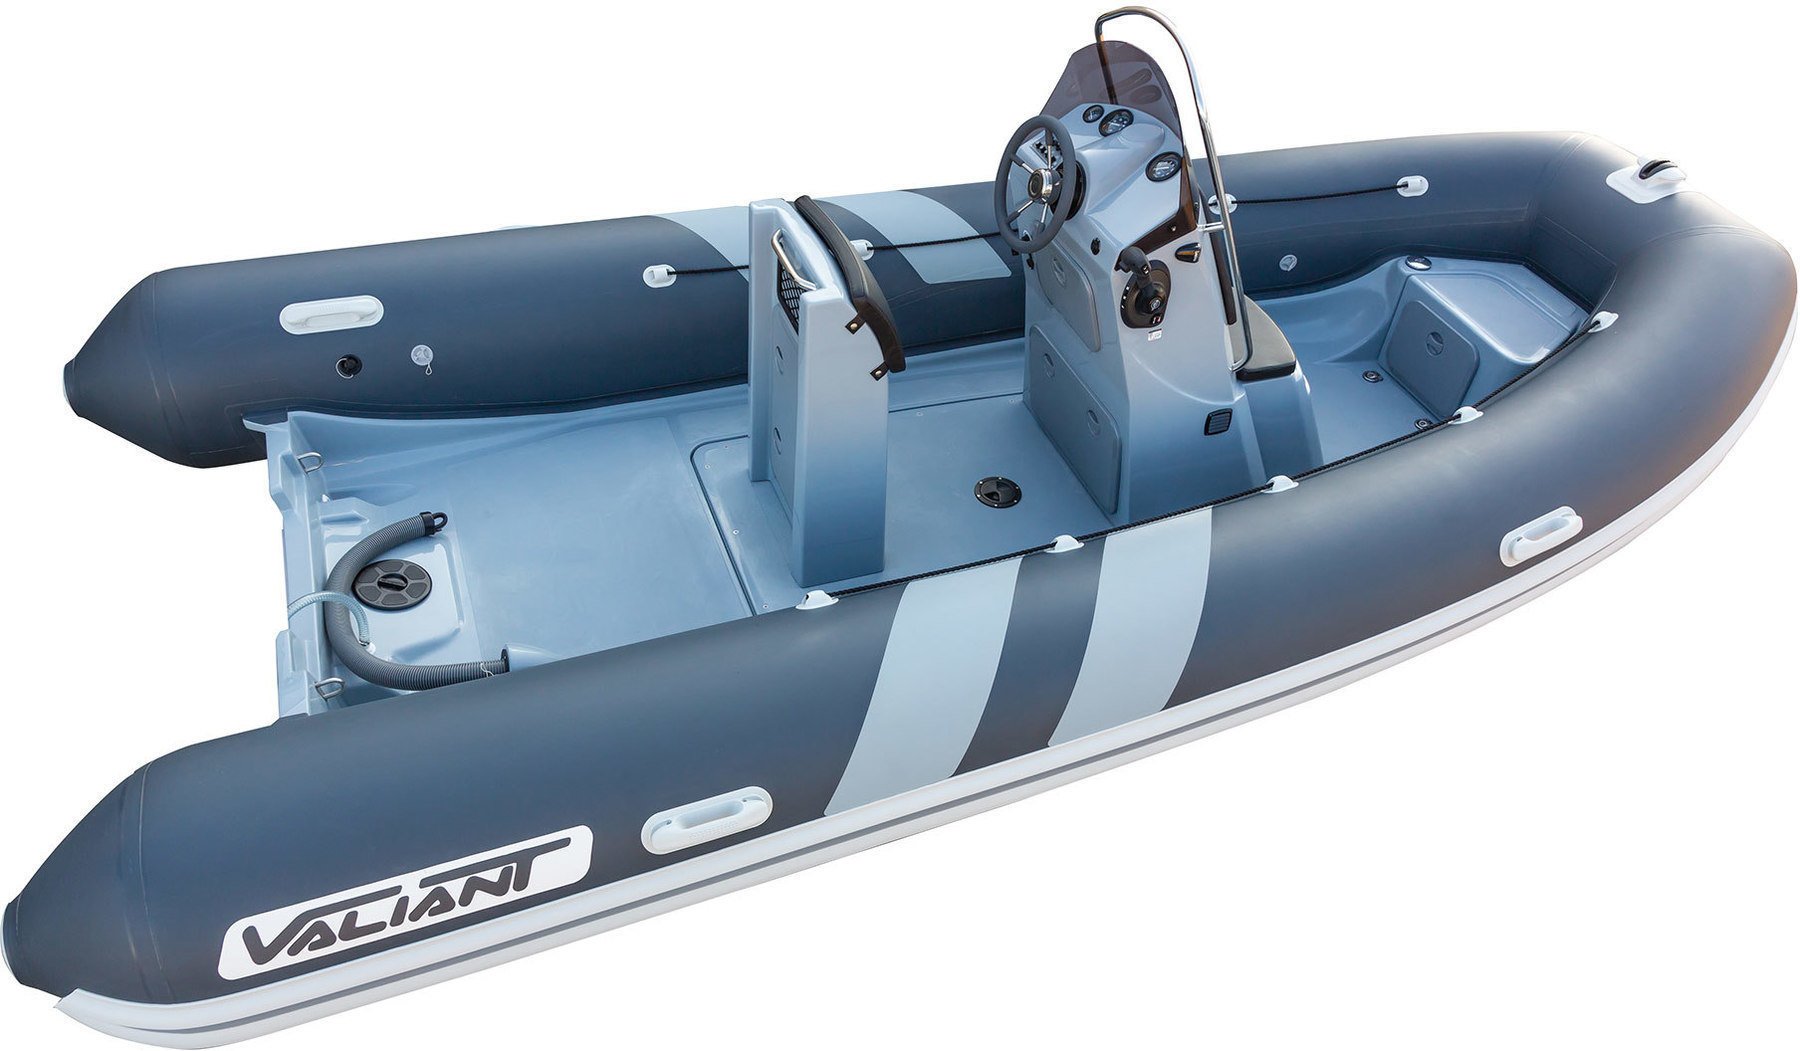 Inflatable Boat Valiant Inflatable Boat Sport Hypalon 500 cm Dark Grey